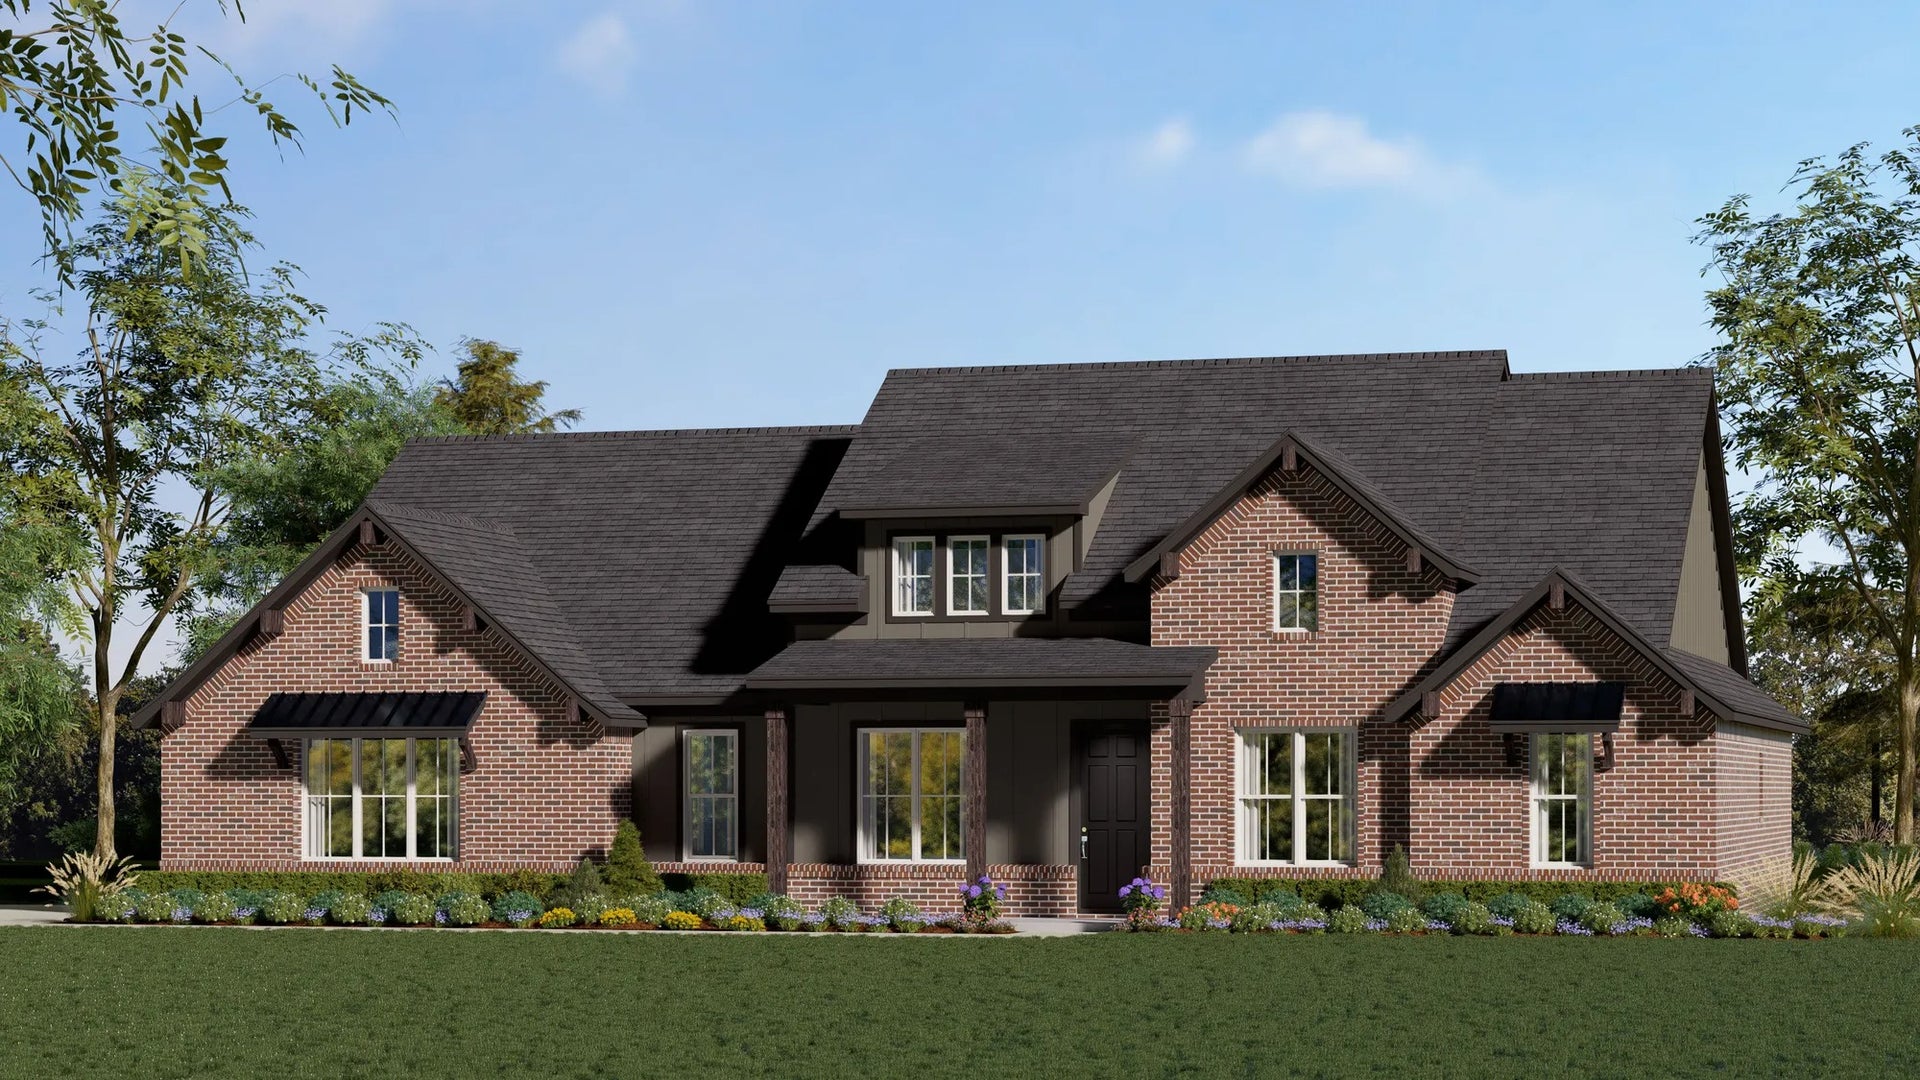 2406 C. Concept 2406 Home with 4 Bedrooms